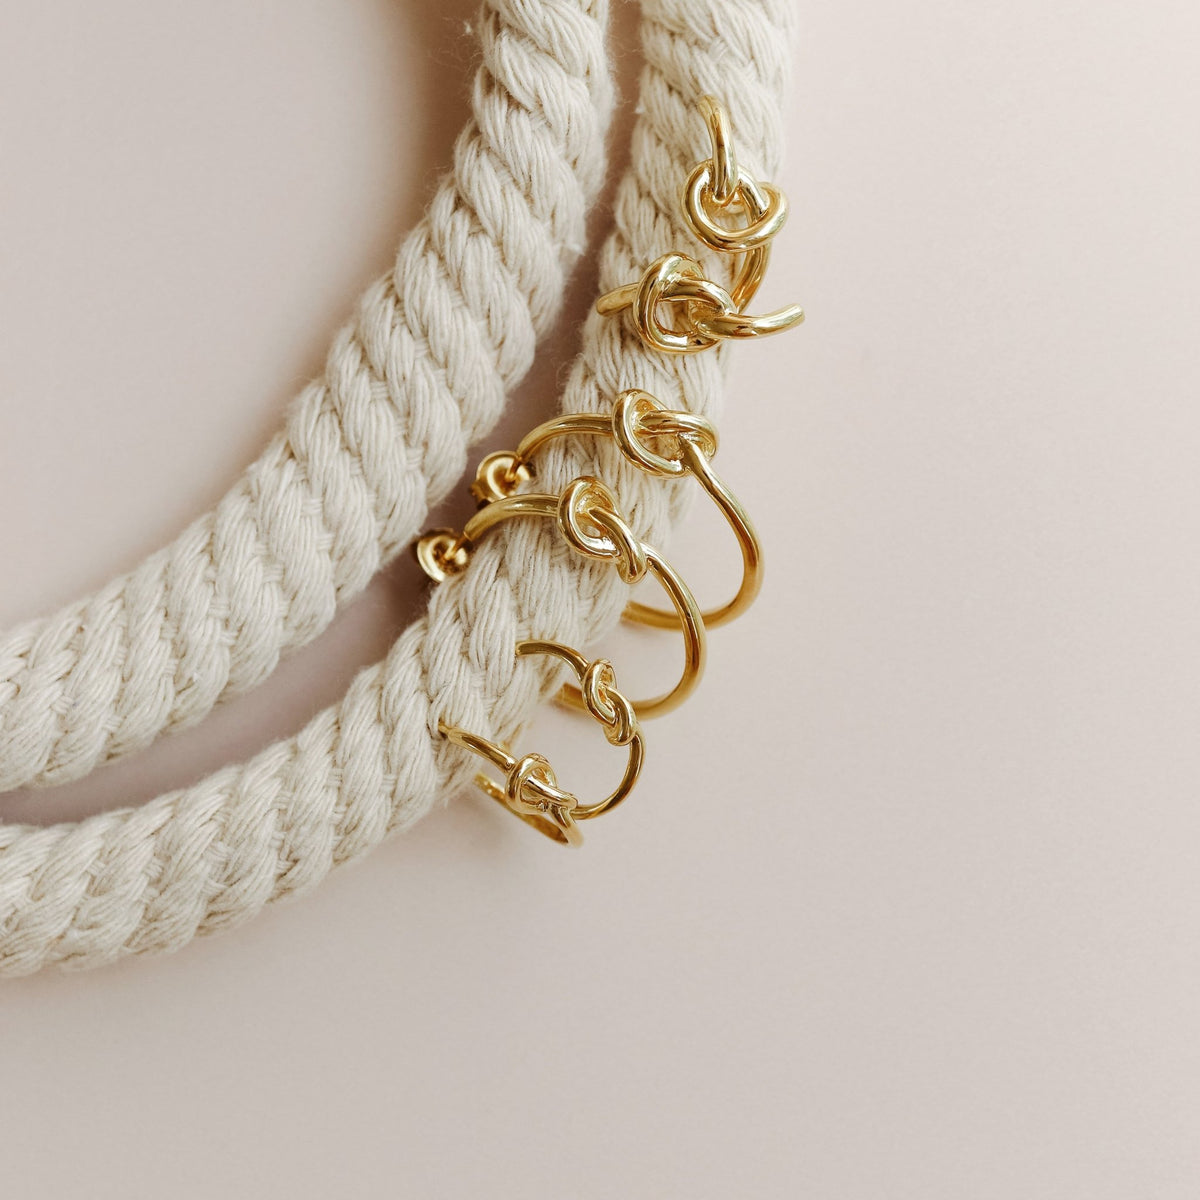 POISE KNOT HOOPS - GOLD - SO PRETTY CARA COTTER